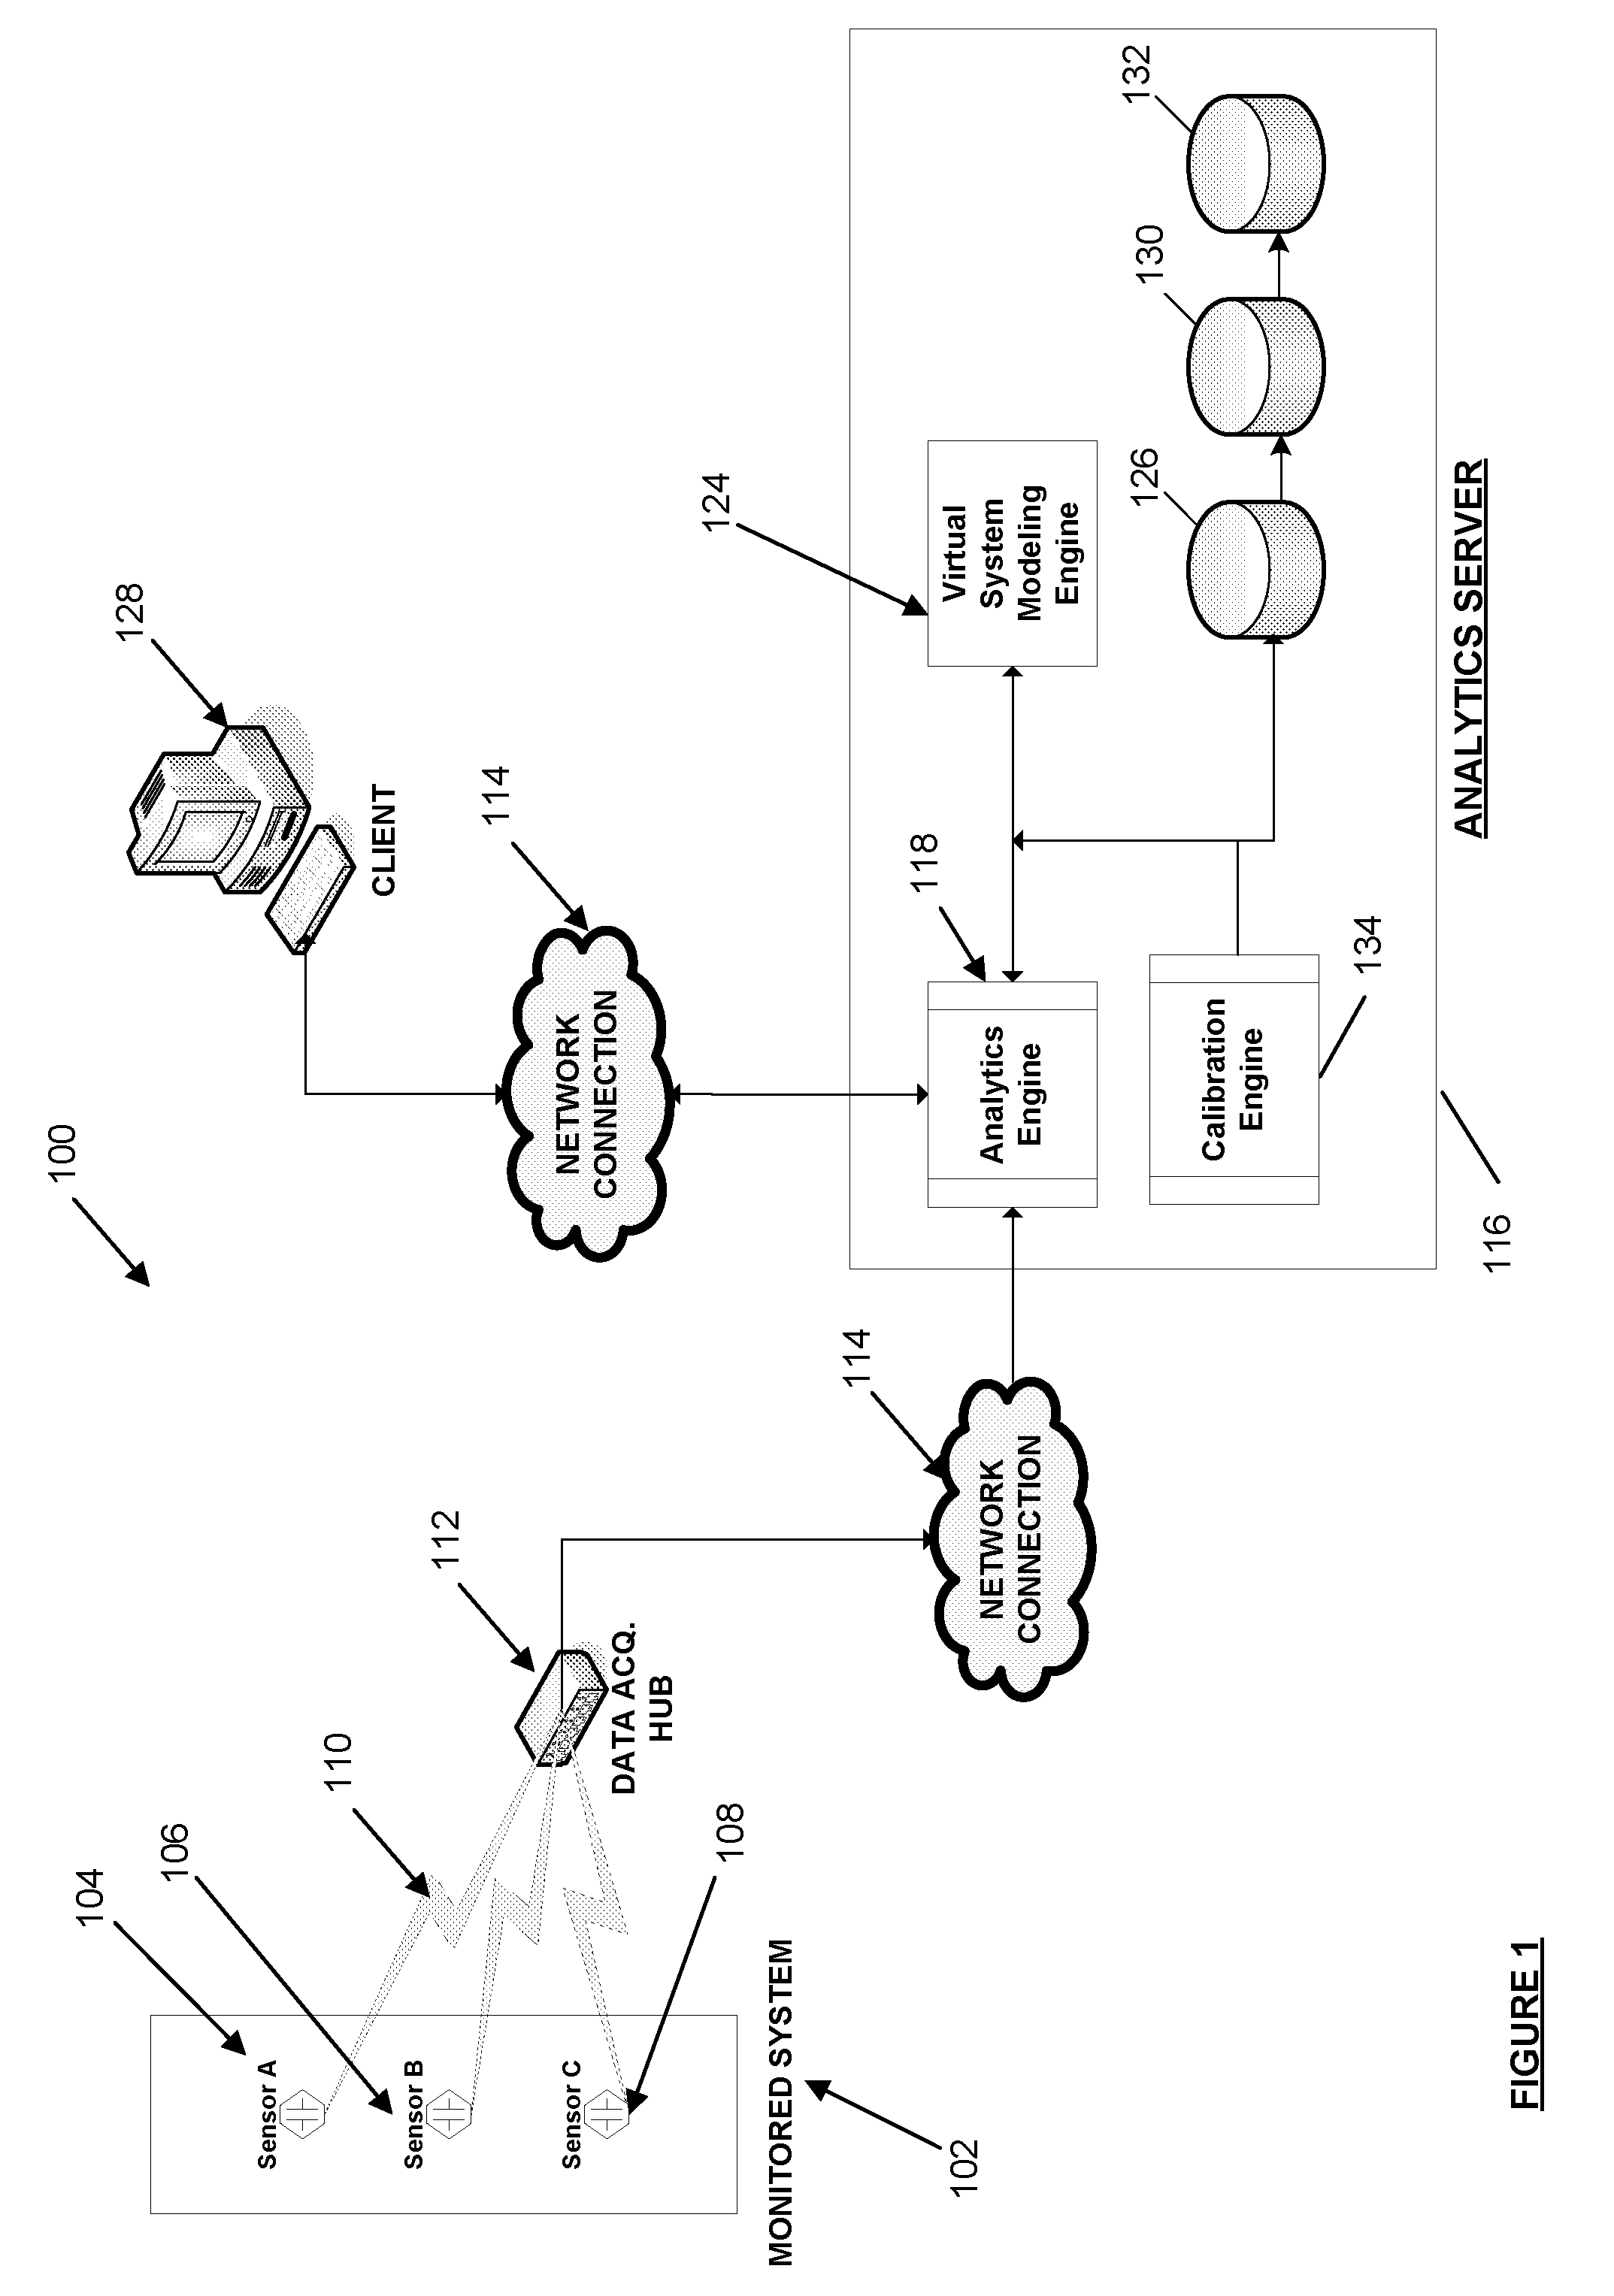 Systems and methods for real-time advanced visualization for predicting the health, reliability and performance of an electrical power system